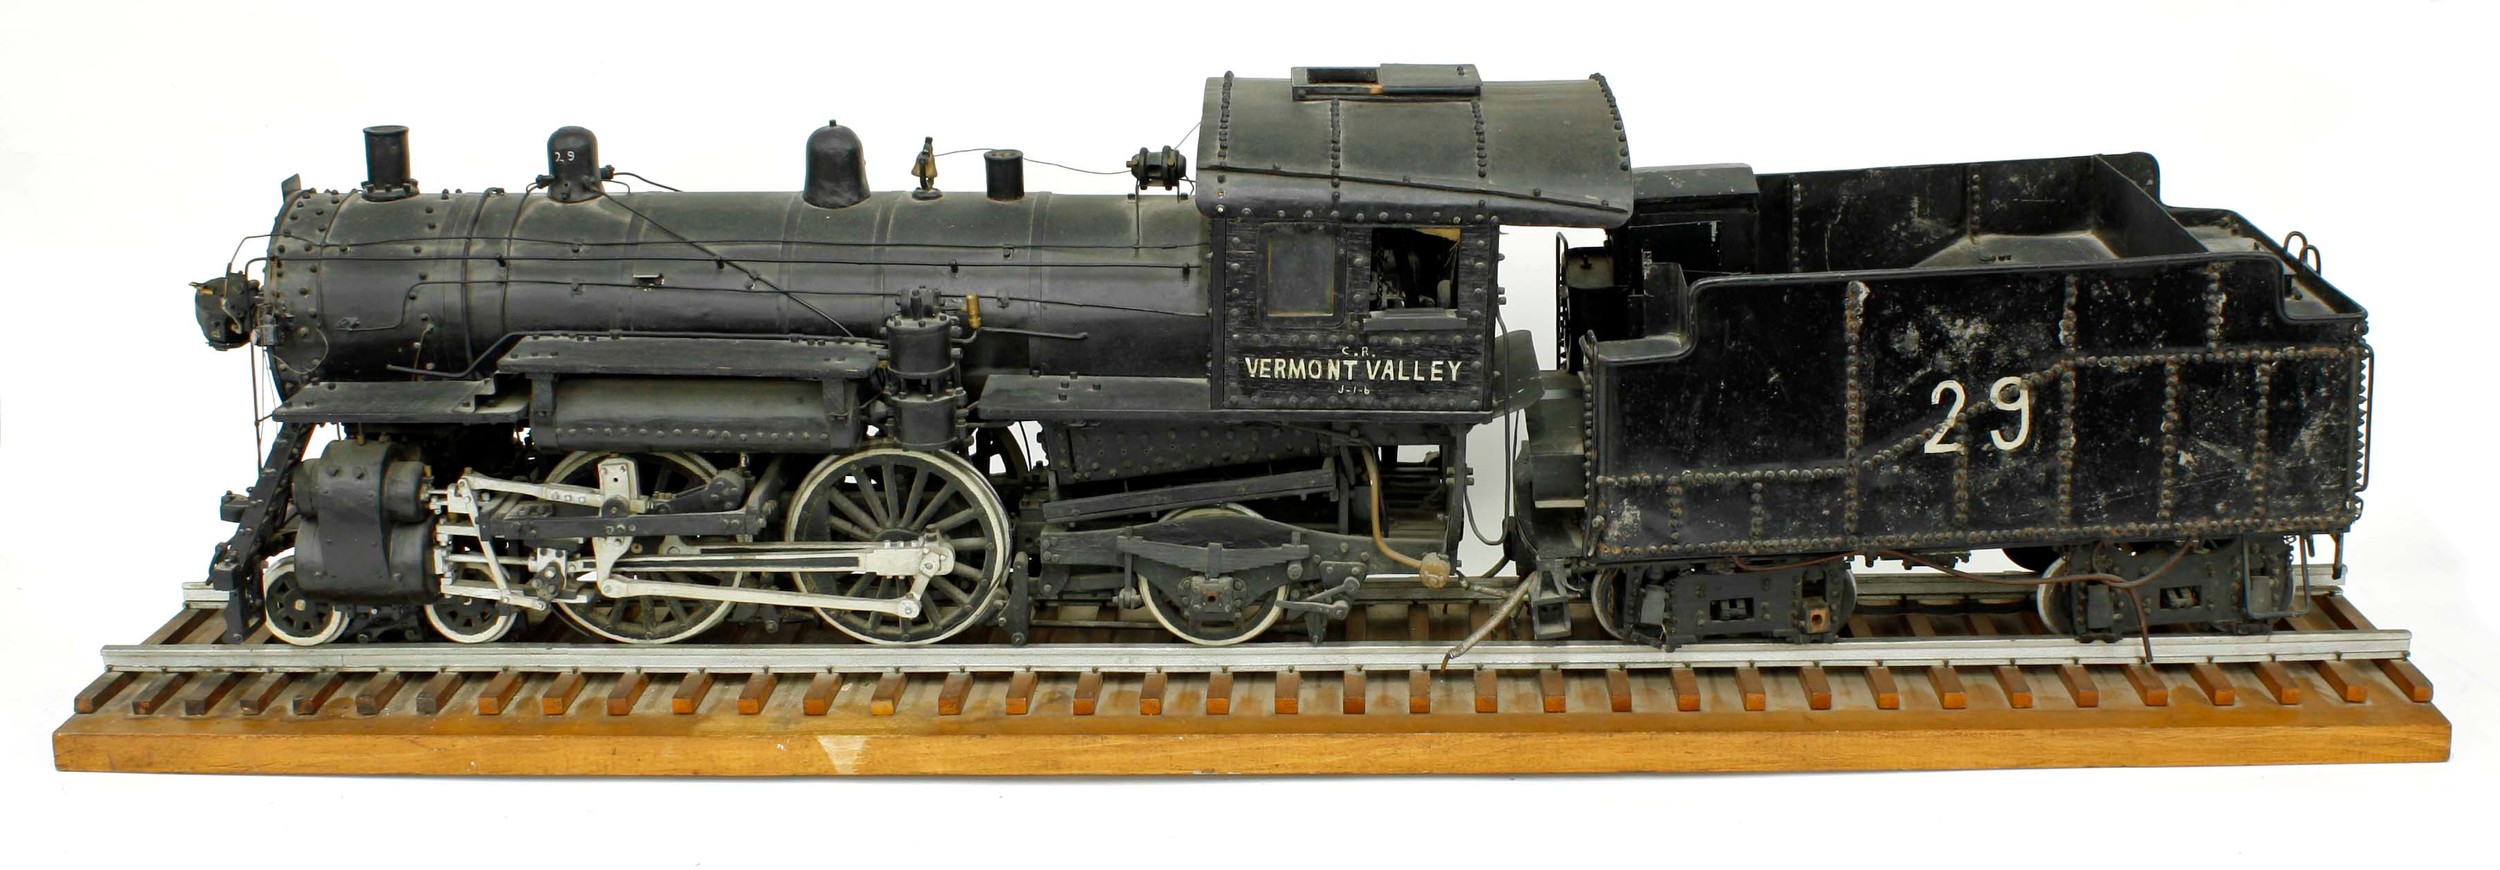 Good American engineering model of a Vermont Valley steam locomotive and tender, made from wood - Image 2 of 4